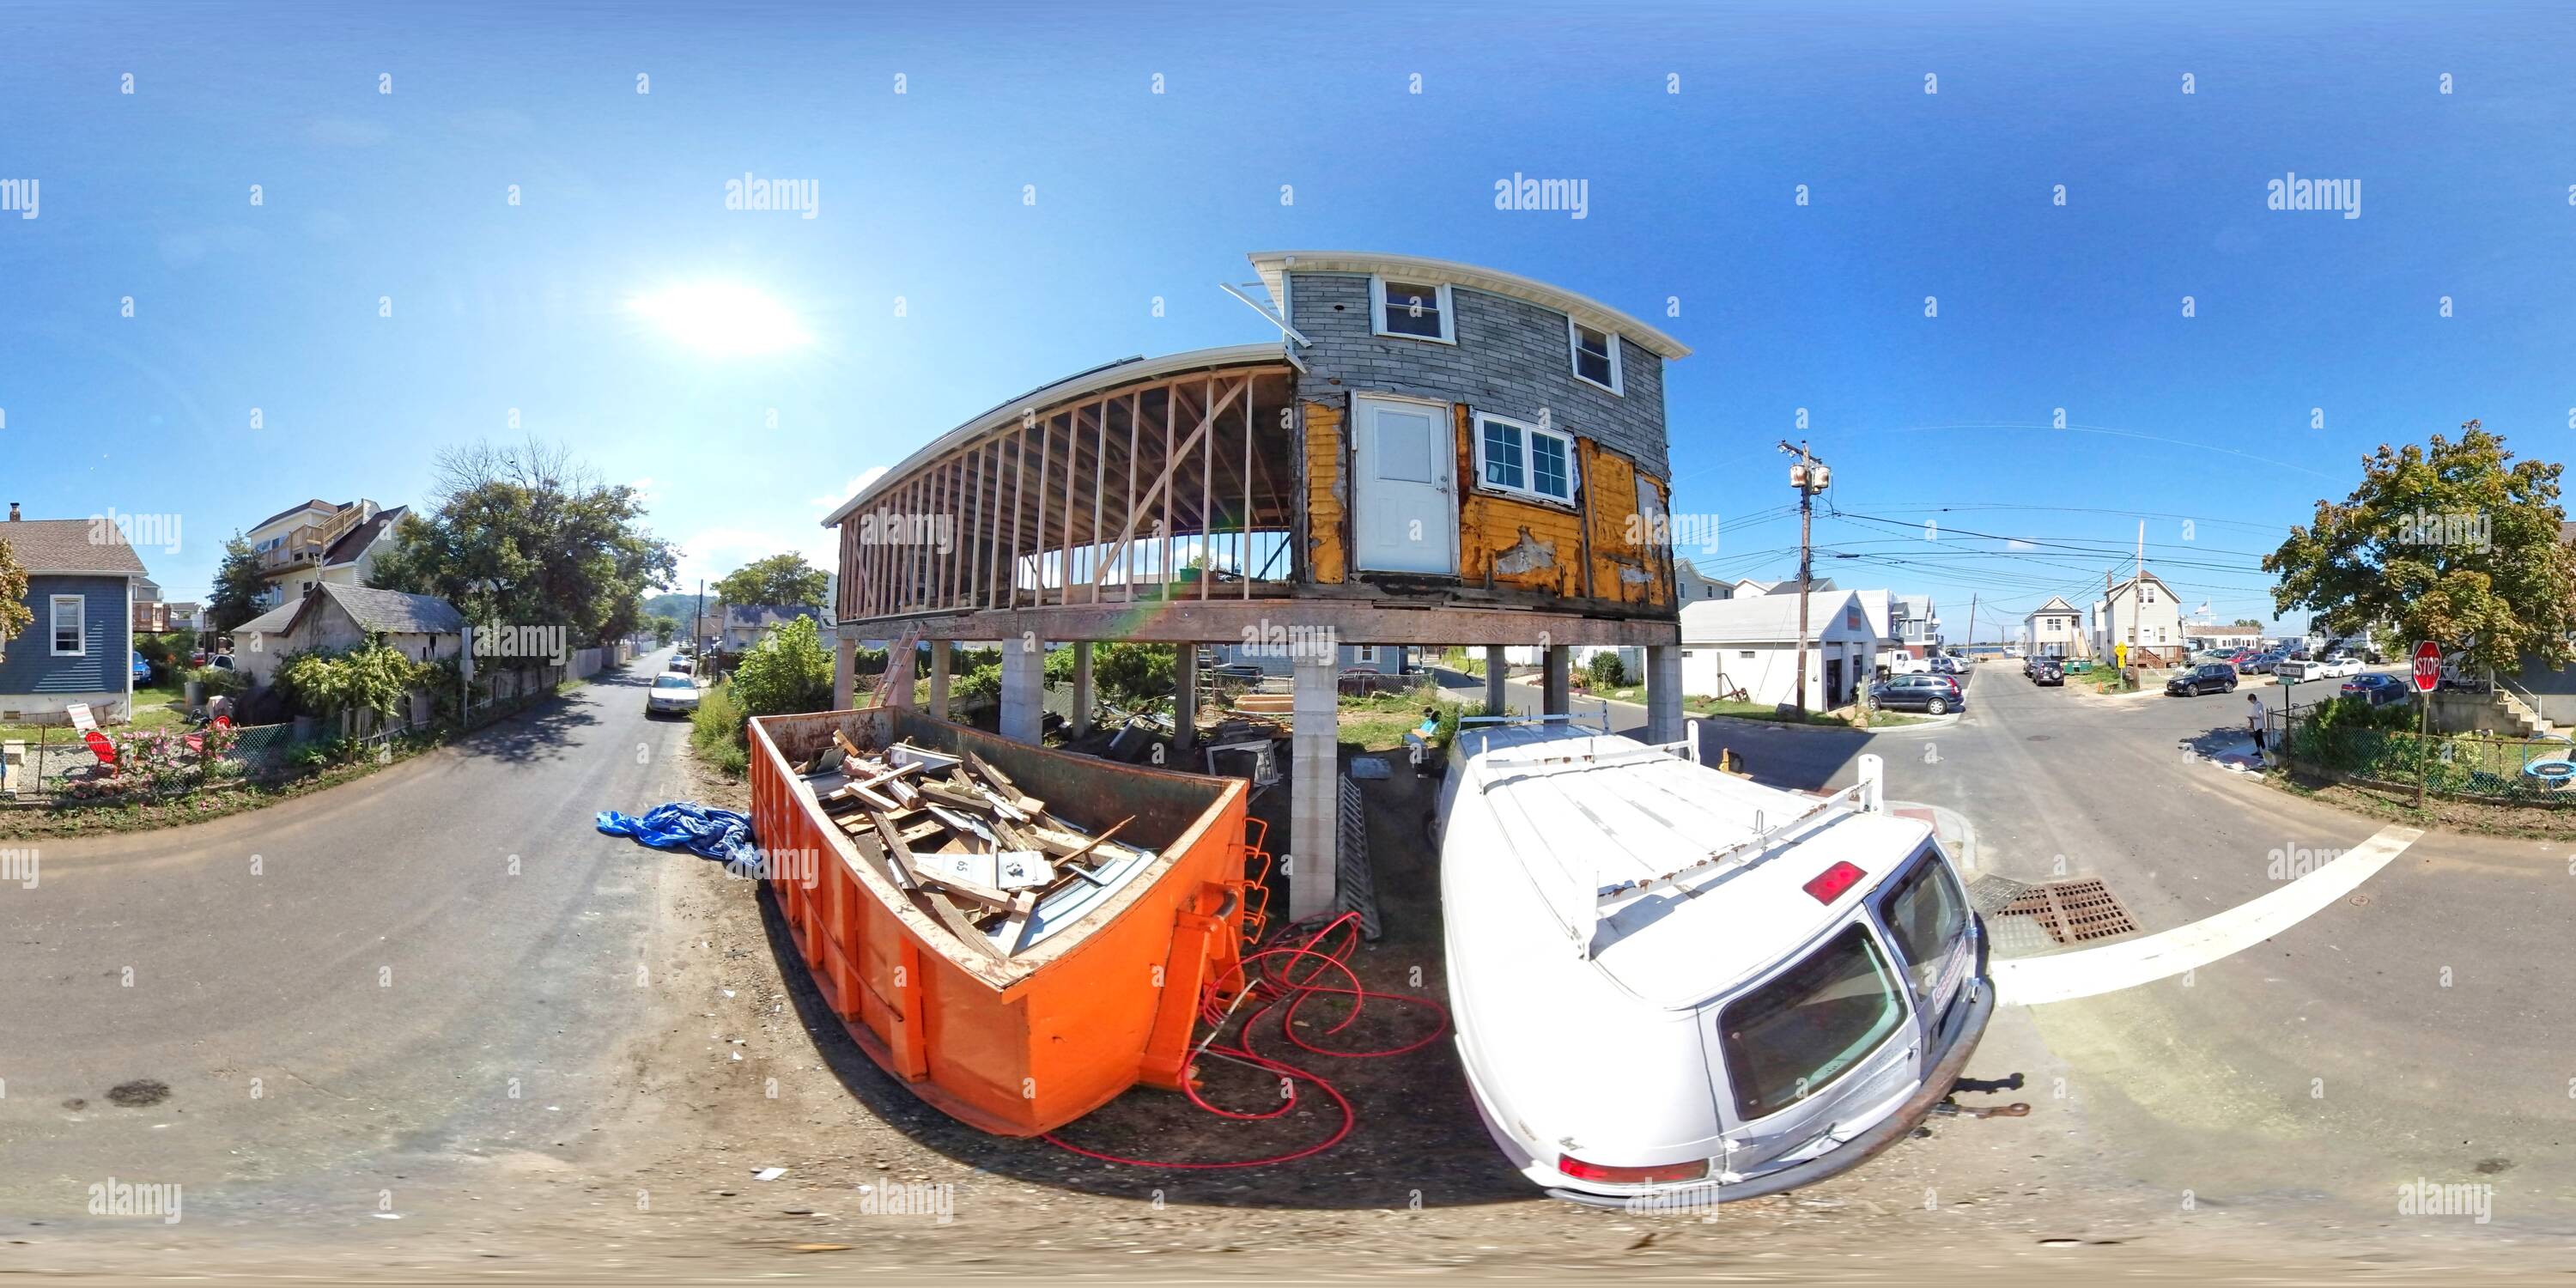 360 degree panoramic view of House Lifting, Highlands, NJ - After Super Storm Sandy 2012